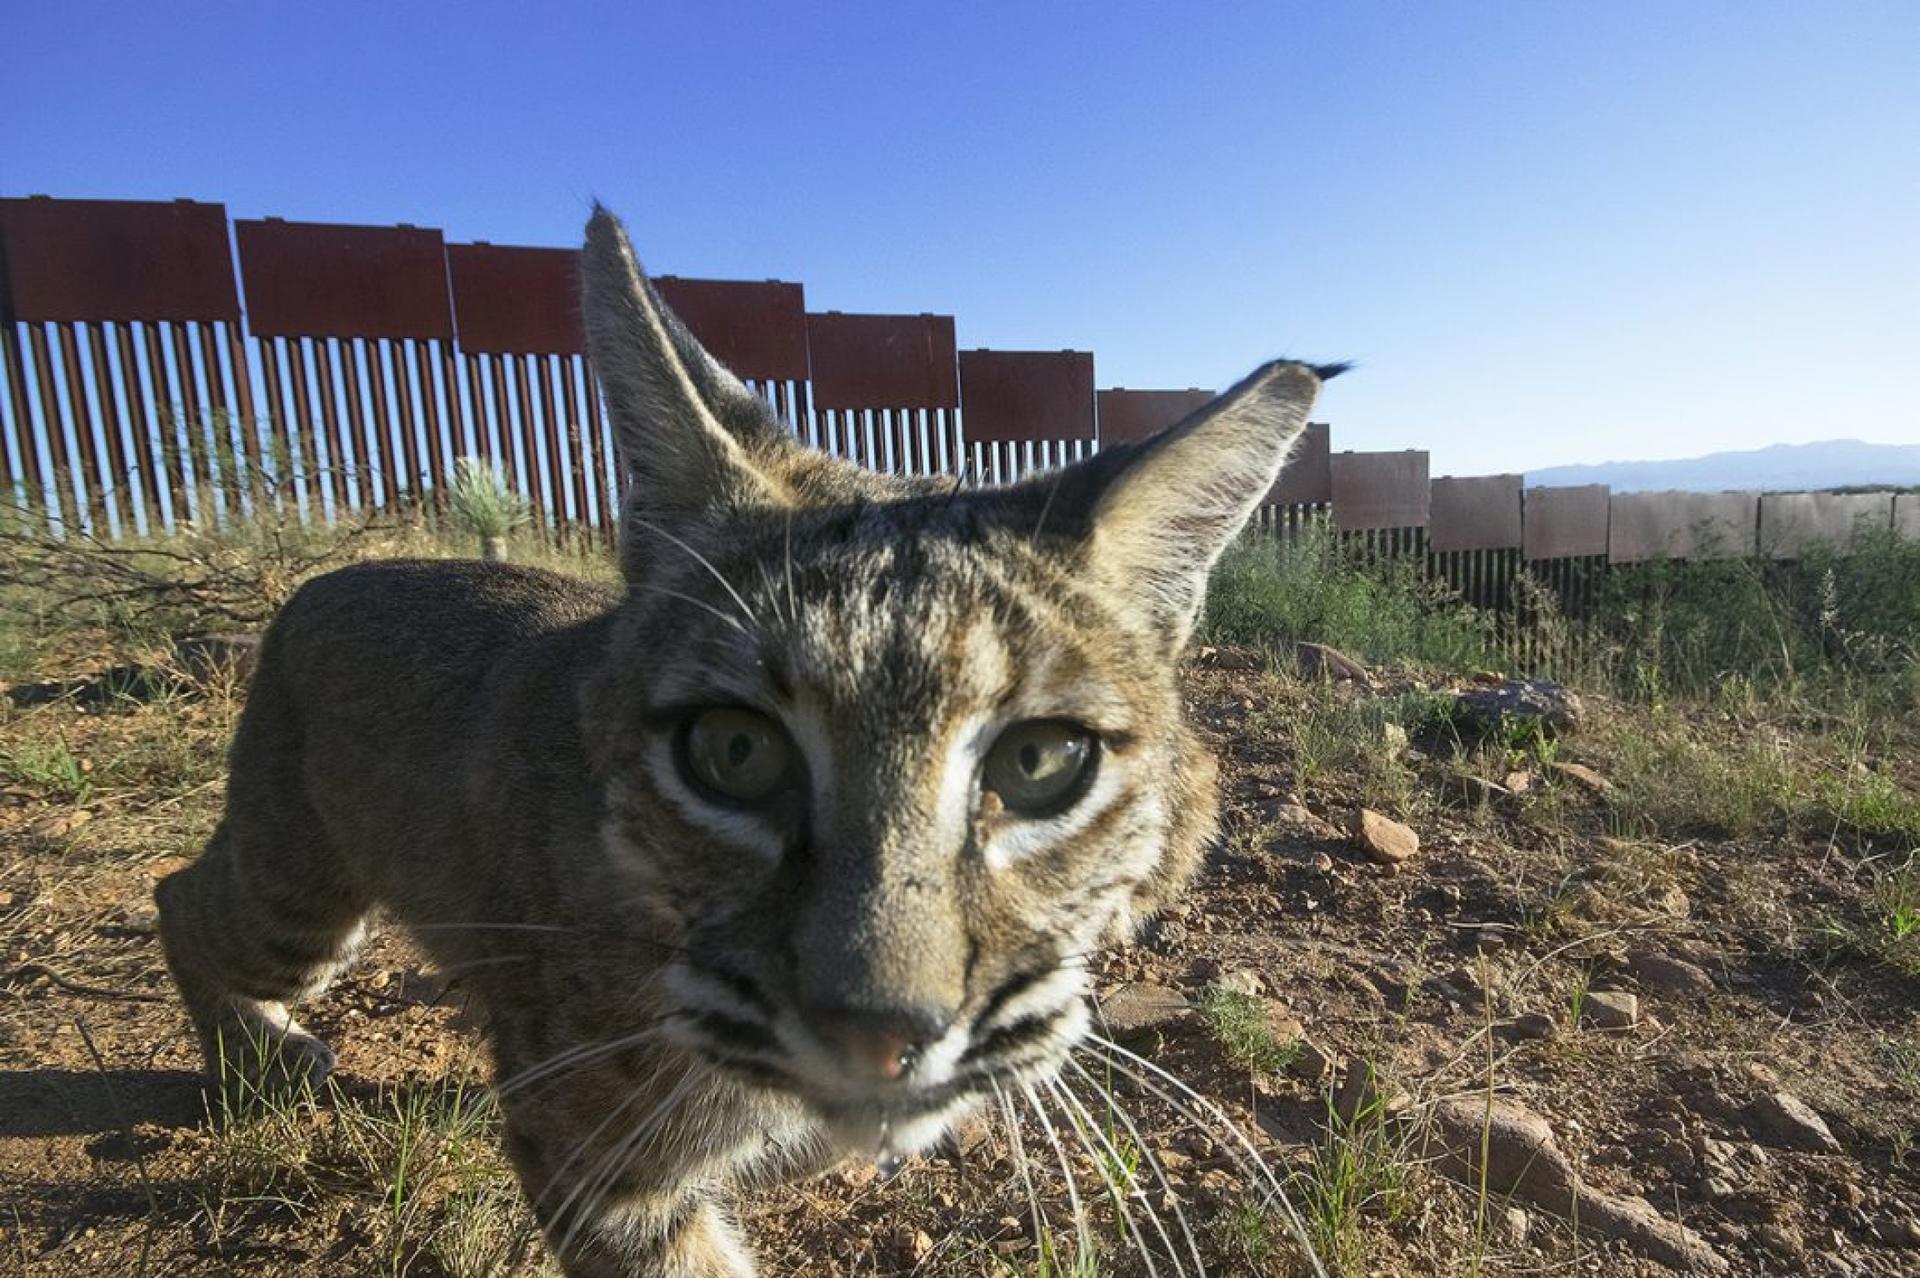 A bobcat is shown looking directly into a camera with the US-Mexico border wall in the distance.